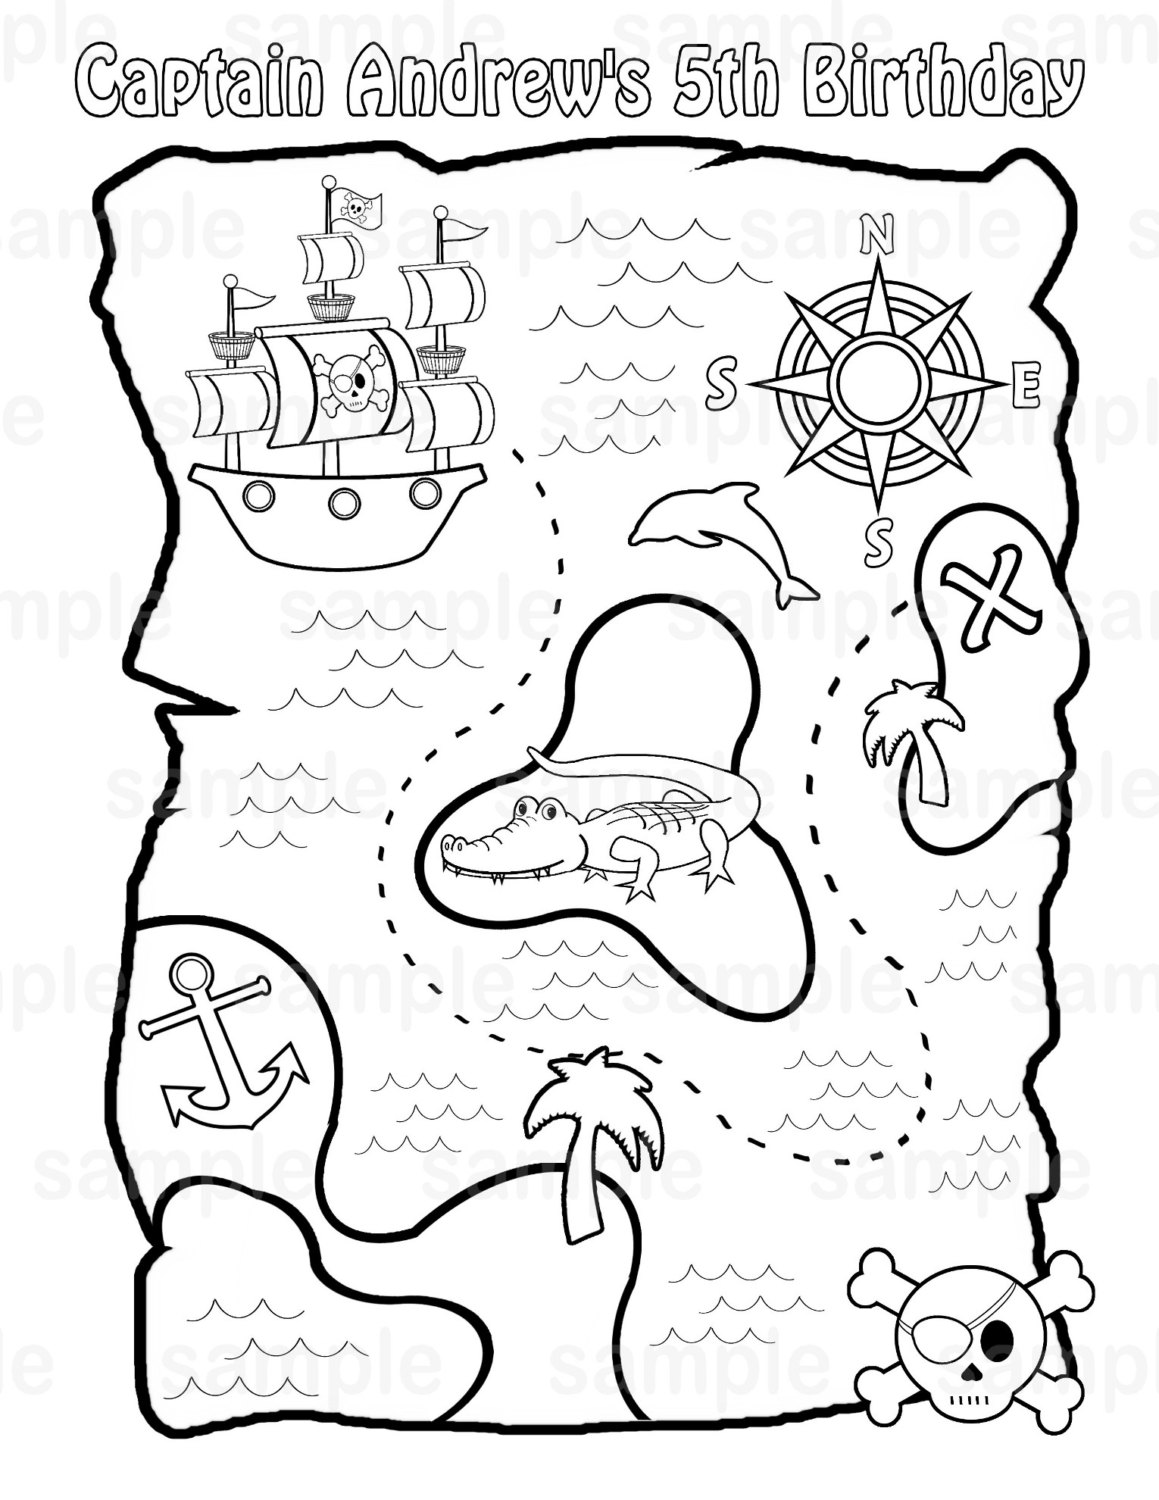 Printable Pirate Treasure Map Coloring Page - Get Coloring Pages